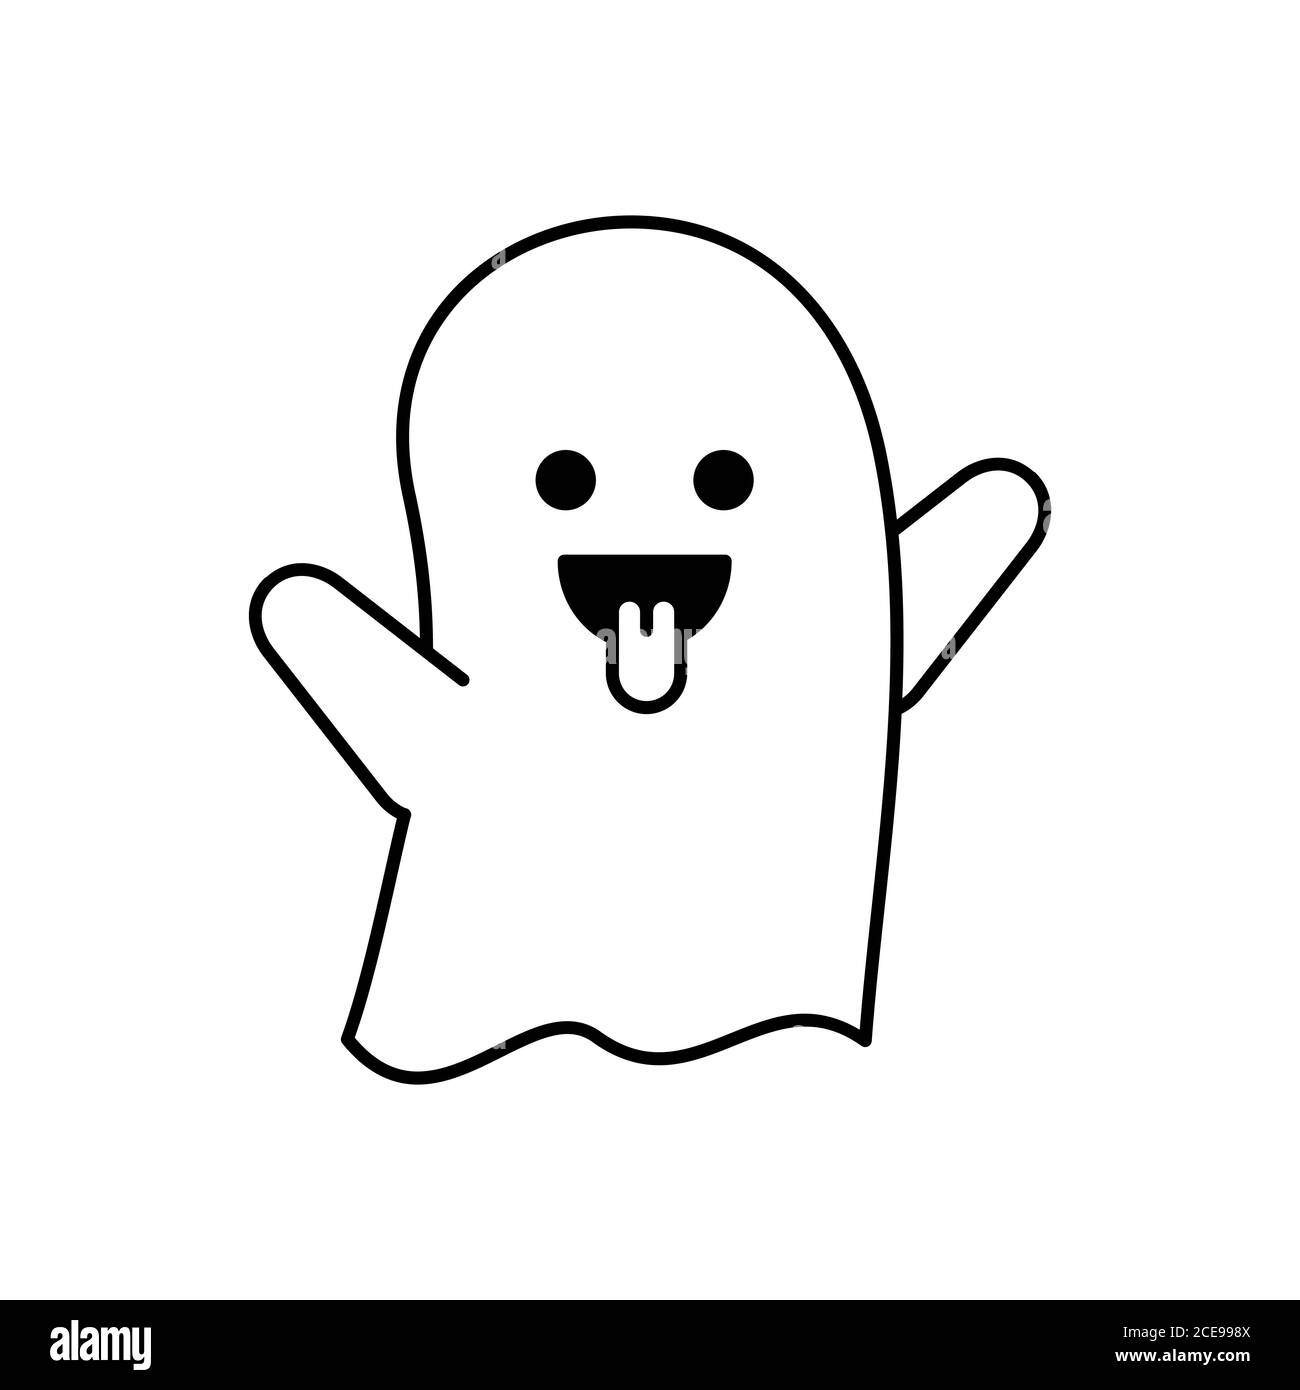 Cute little ghost showing tongue. Funny halloween character. Black outline on white background. Smiling ghost trying to be scary. Thin line icon. Stock Vector